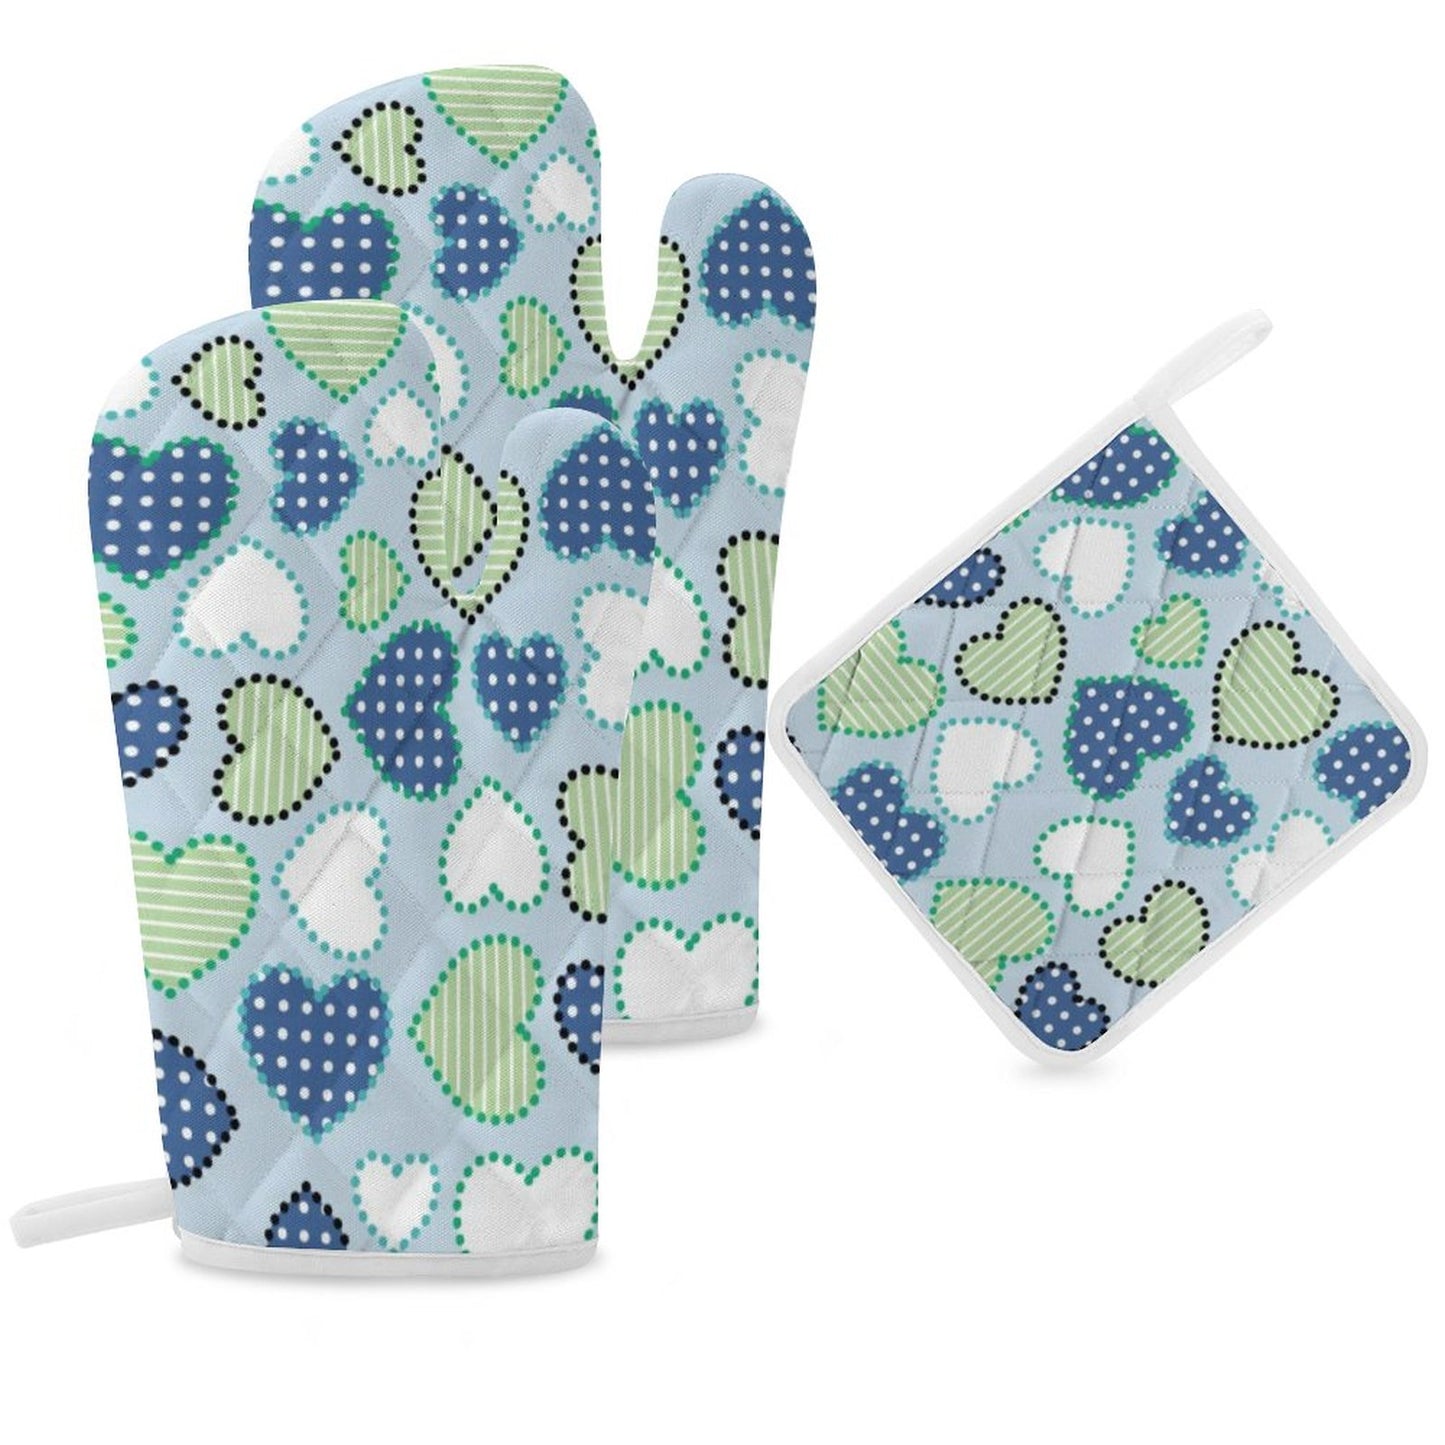 Online Customize Oven Mitts And Pot Holders Sets 3 PCS